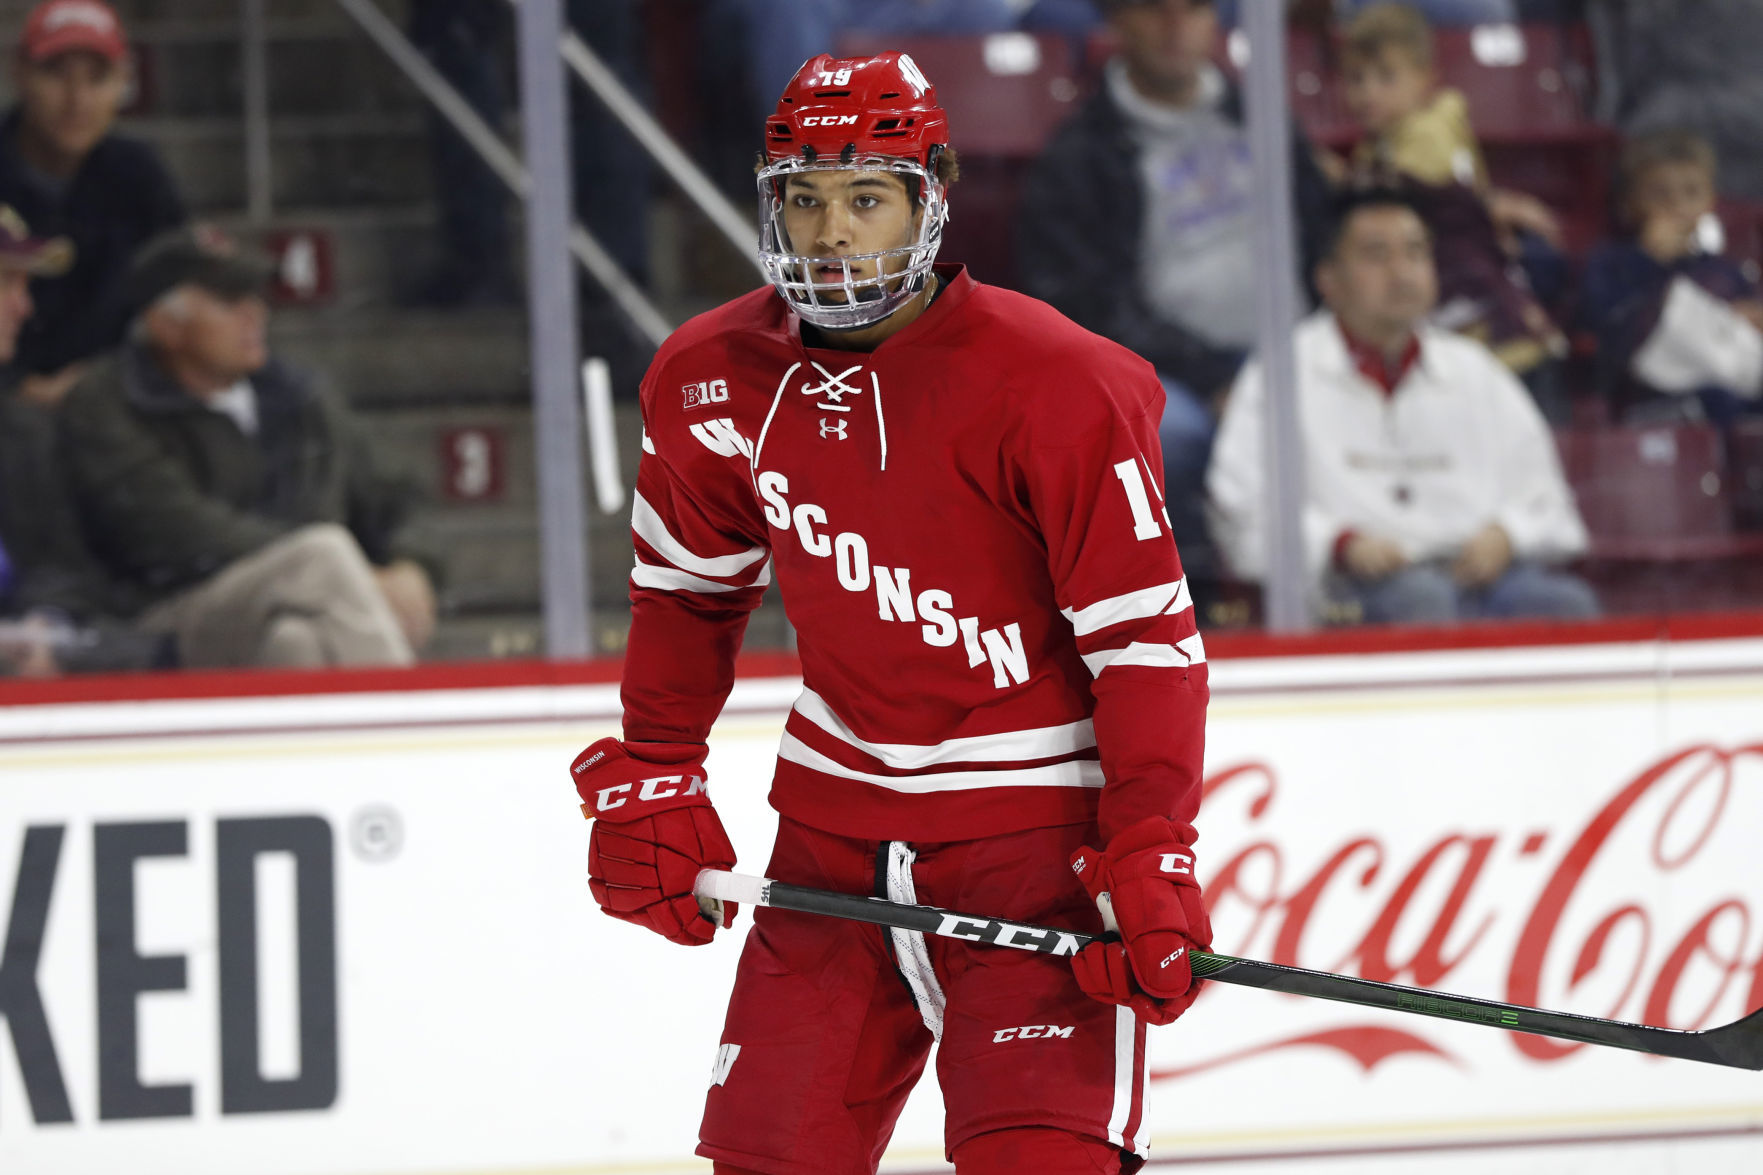 Former Badgers defenseman KAndre Miller, subjected to racist slurs online, says its time for action, time for change